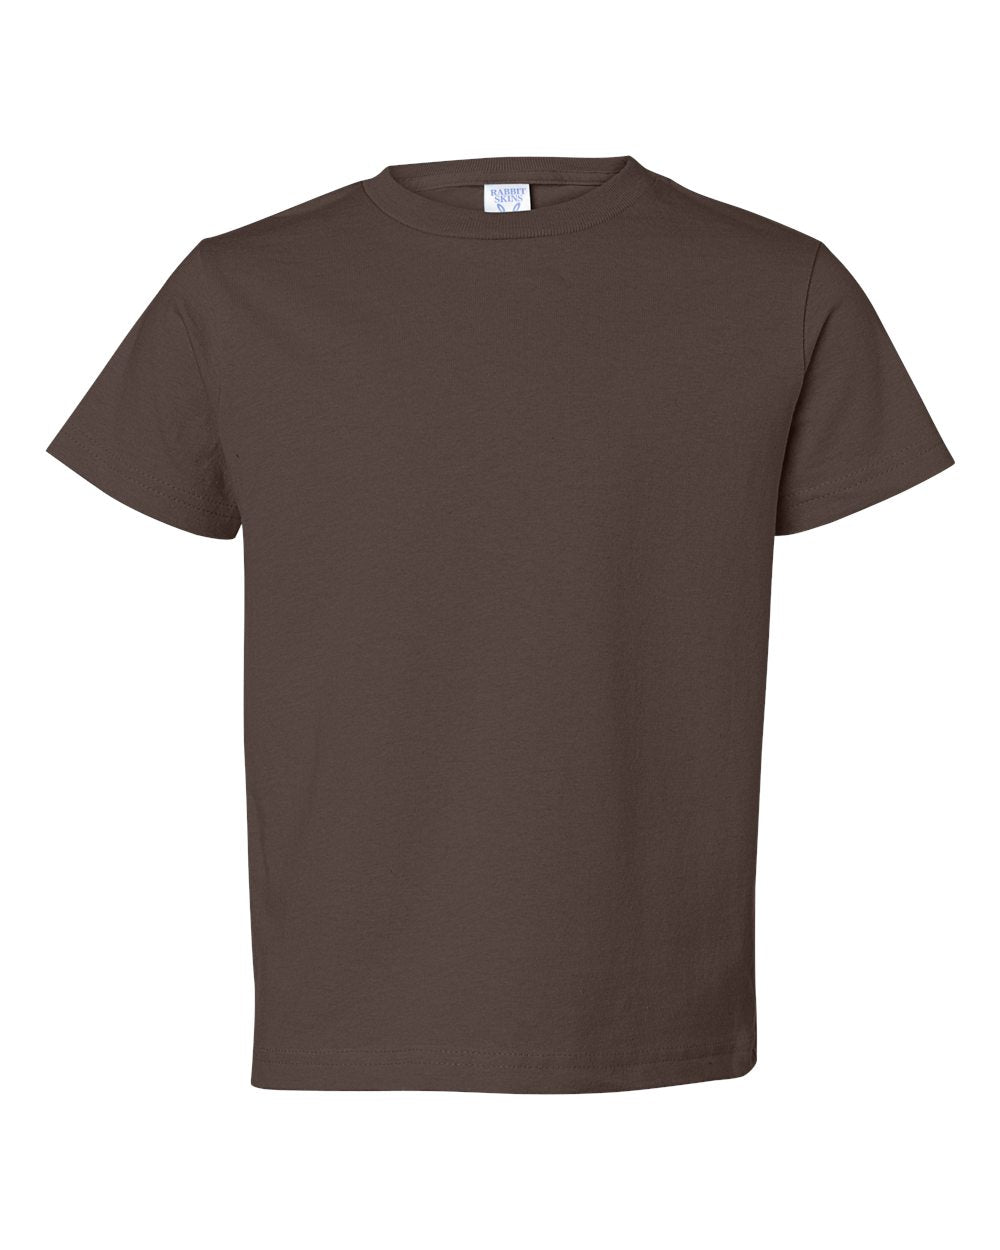 RS 3301T Toddler Crew - Brown